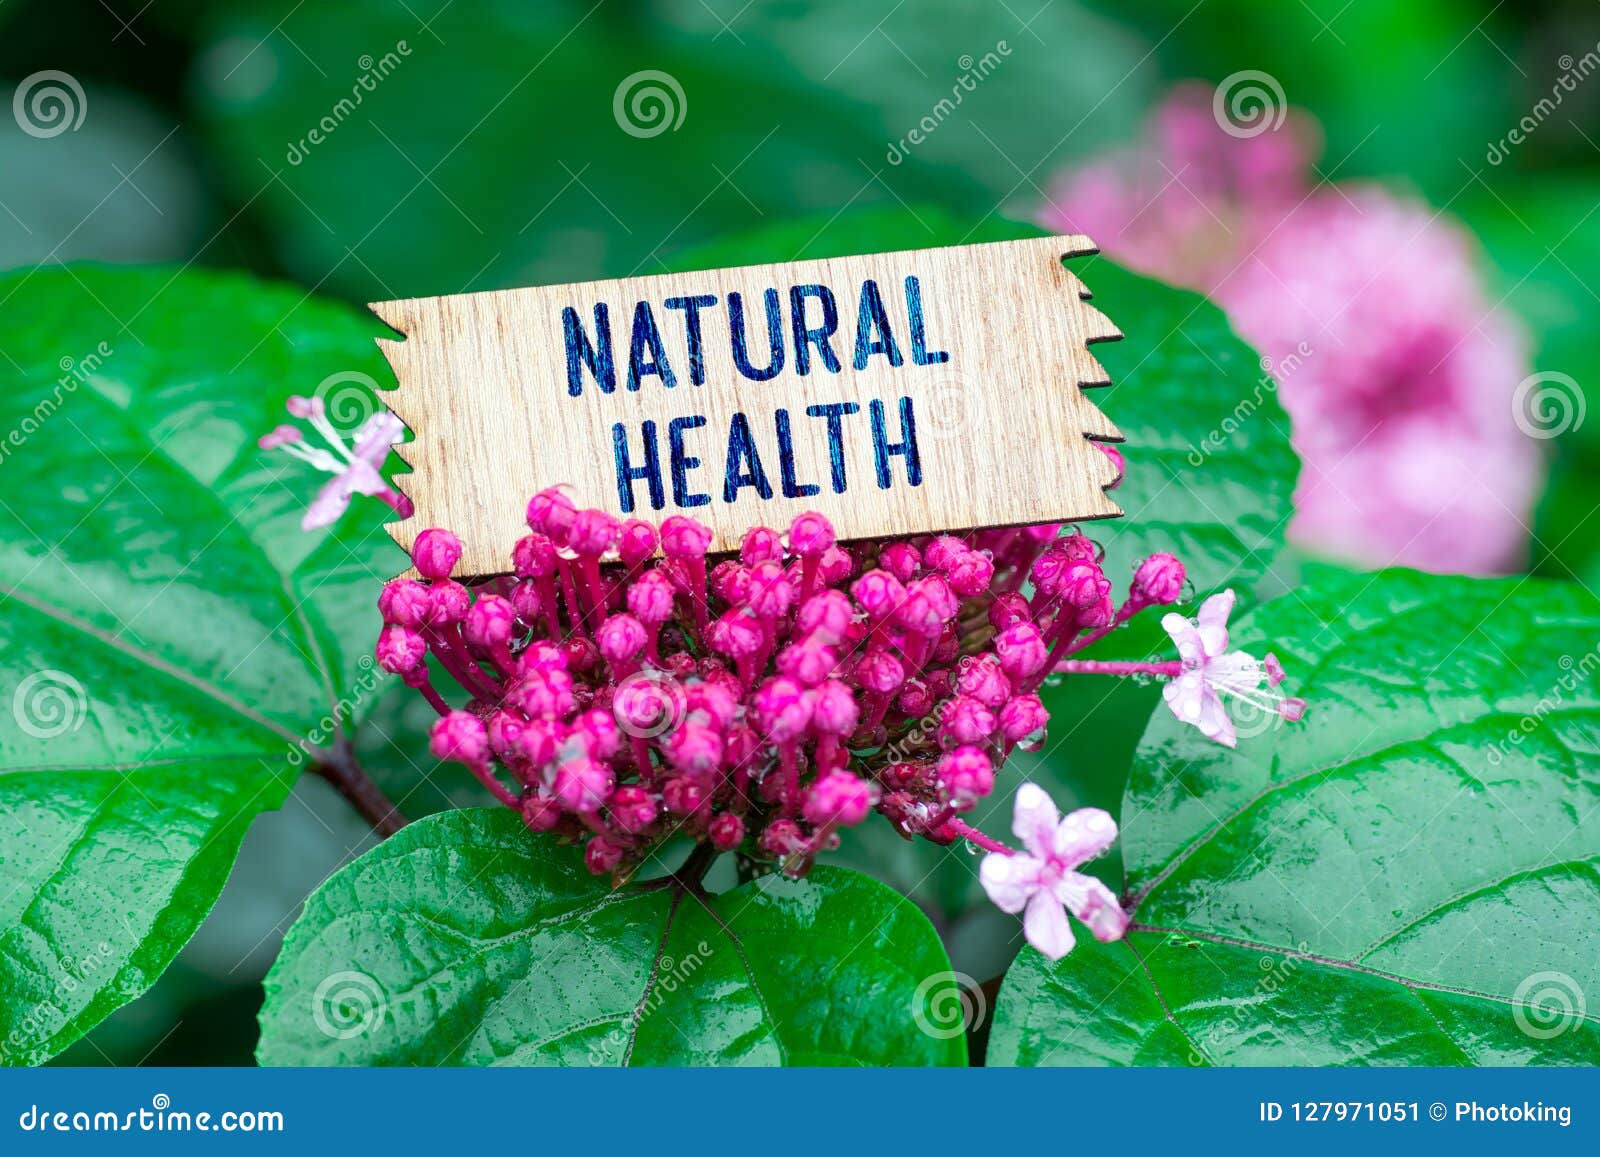 natural health in wooden card